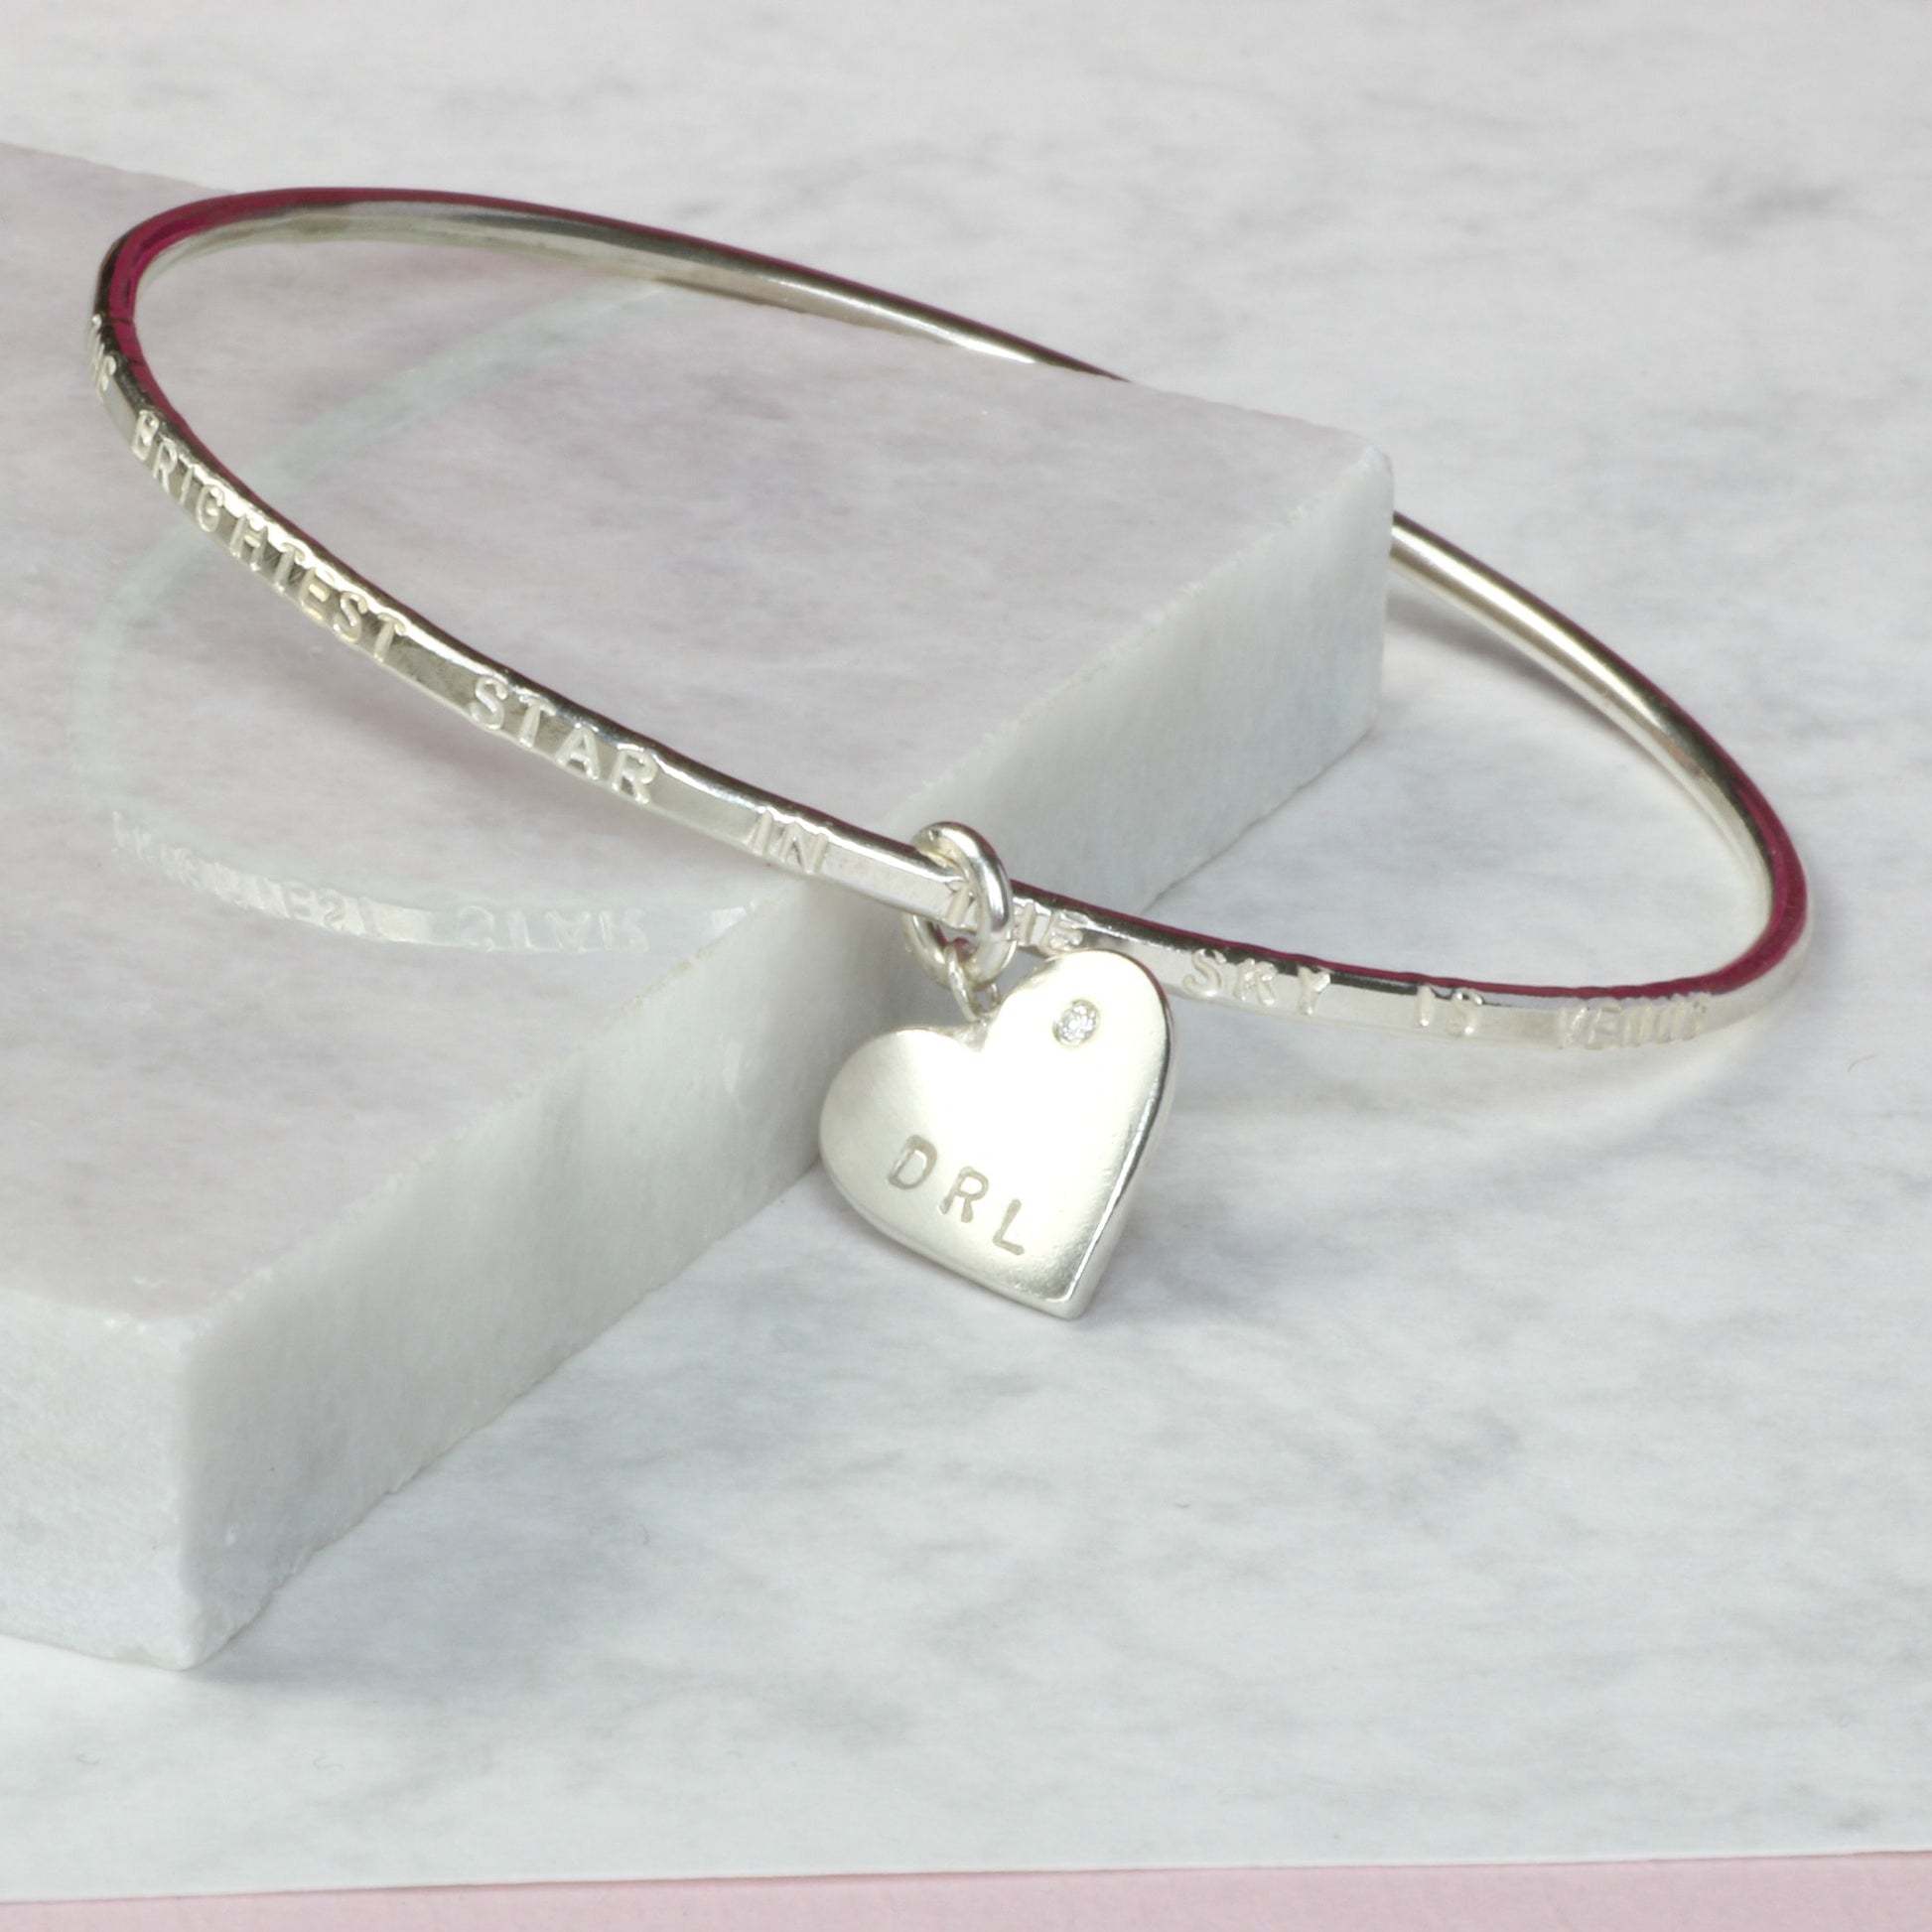 Personalised remembrance bracelet with diamond, commemorative jewelry personalized - Gracie